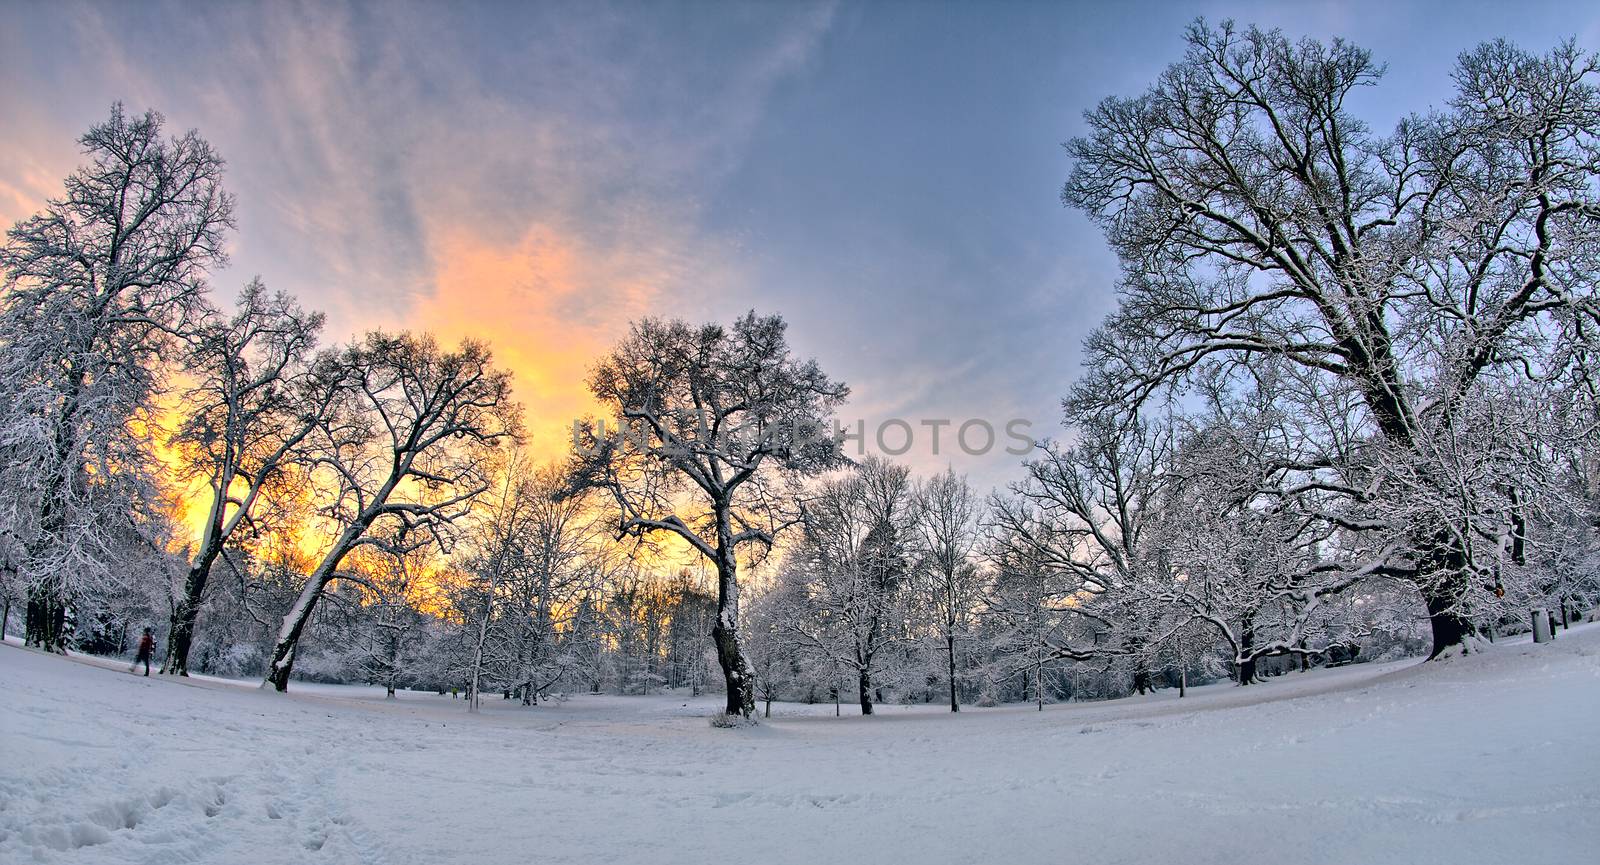 Snowy sunset in the park